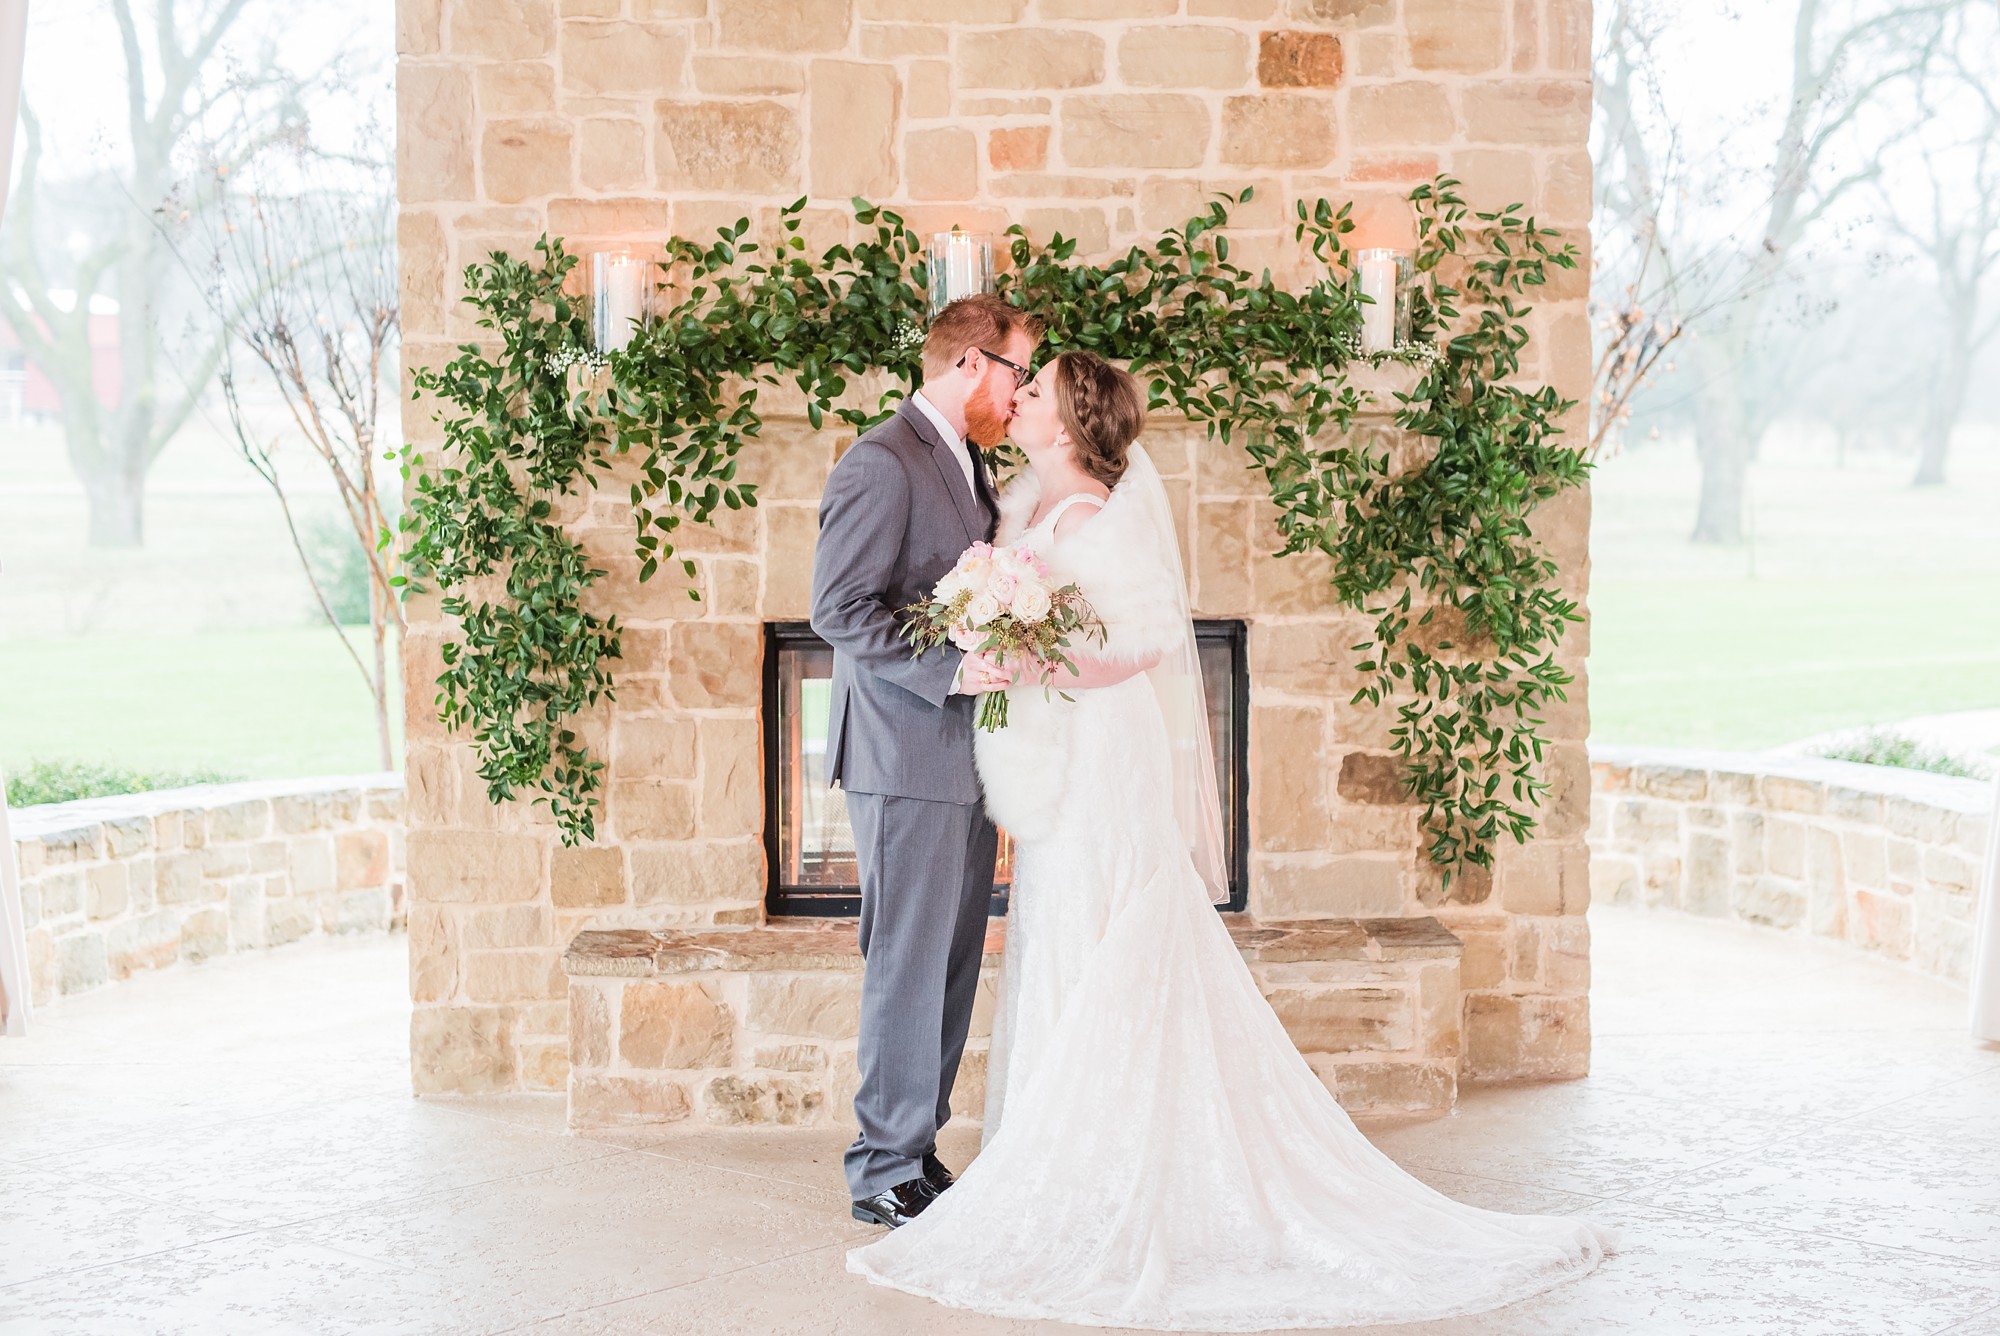 Wedding at The Orchard in Azle